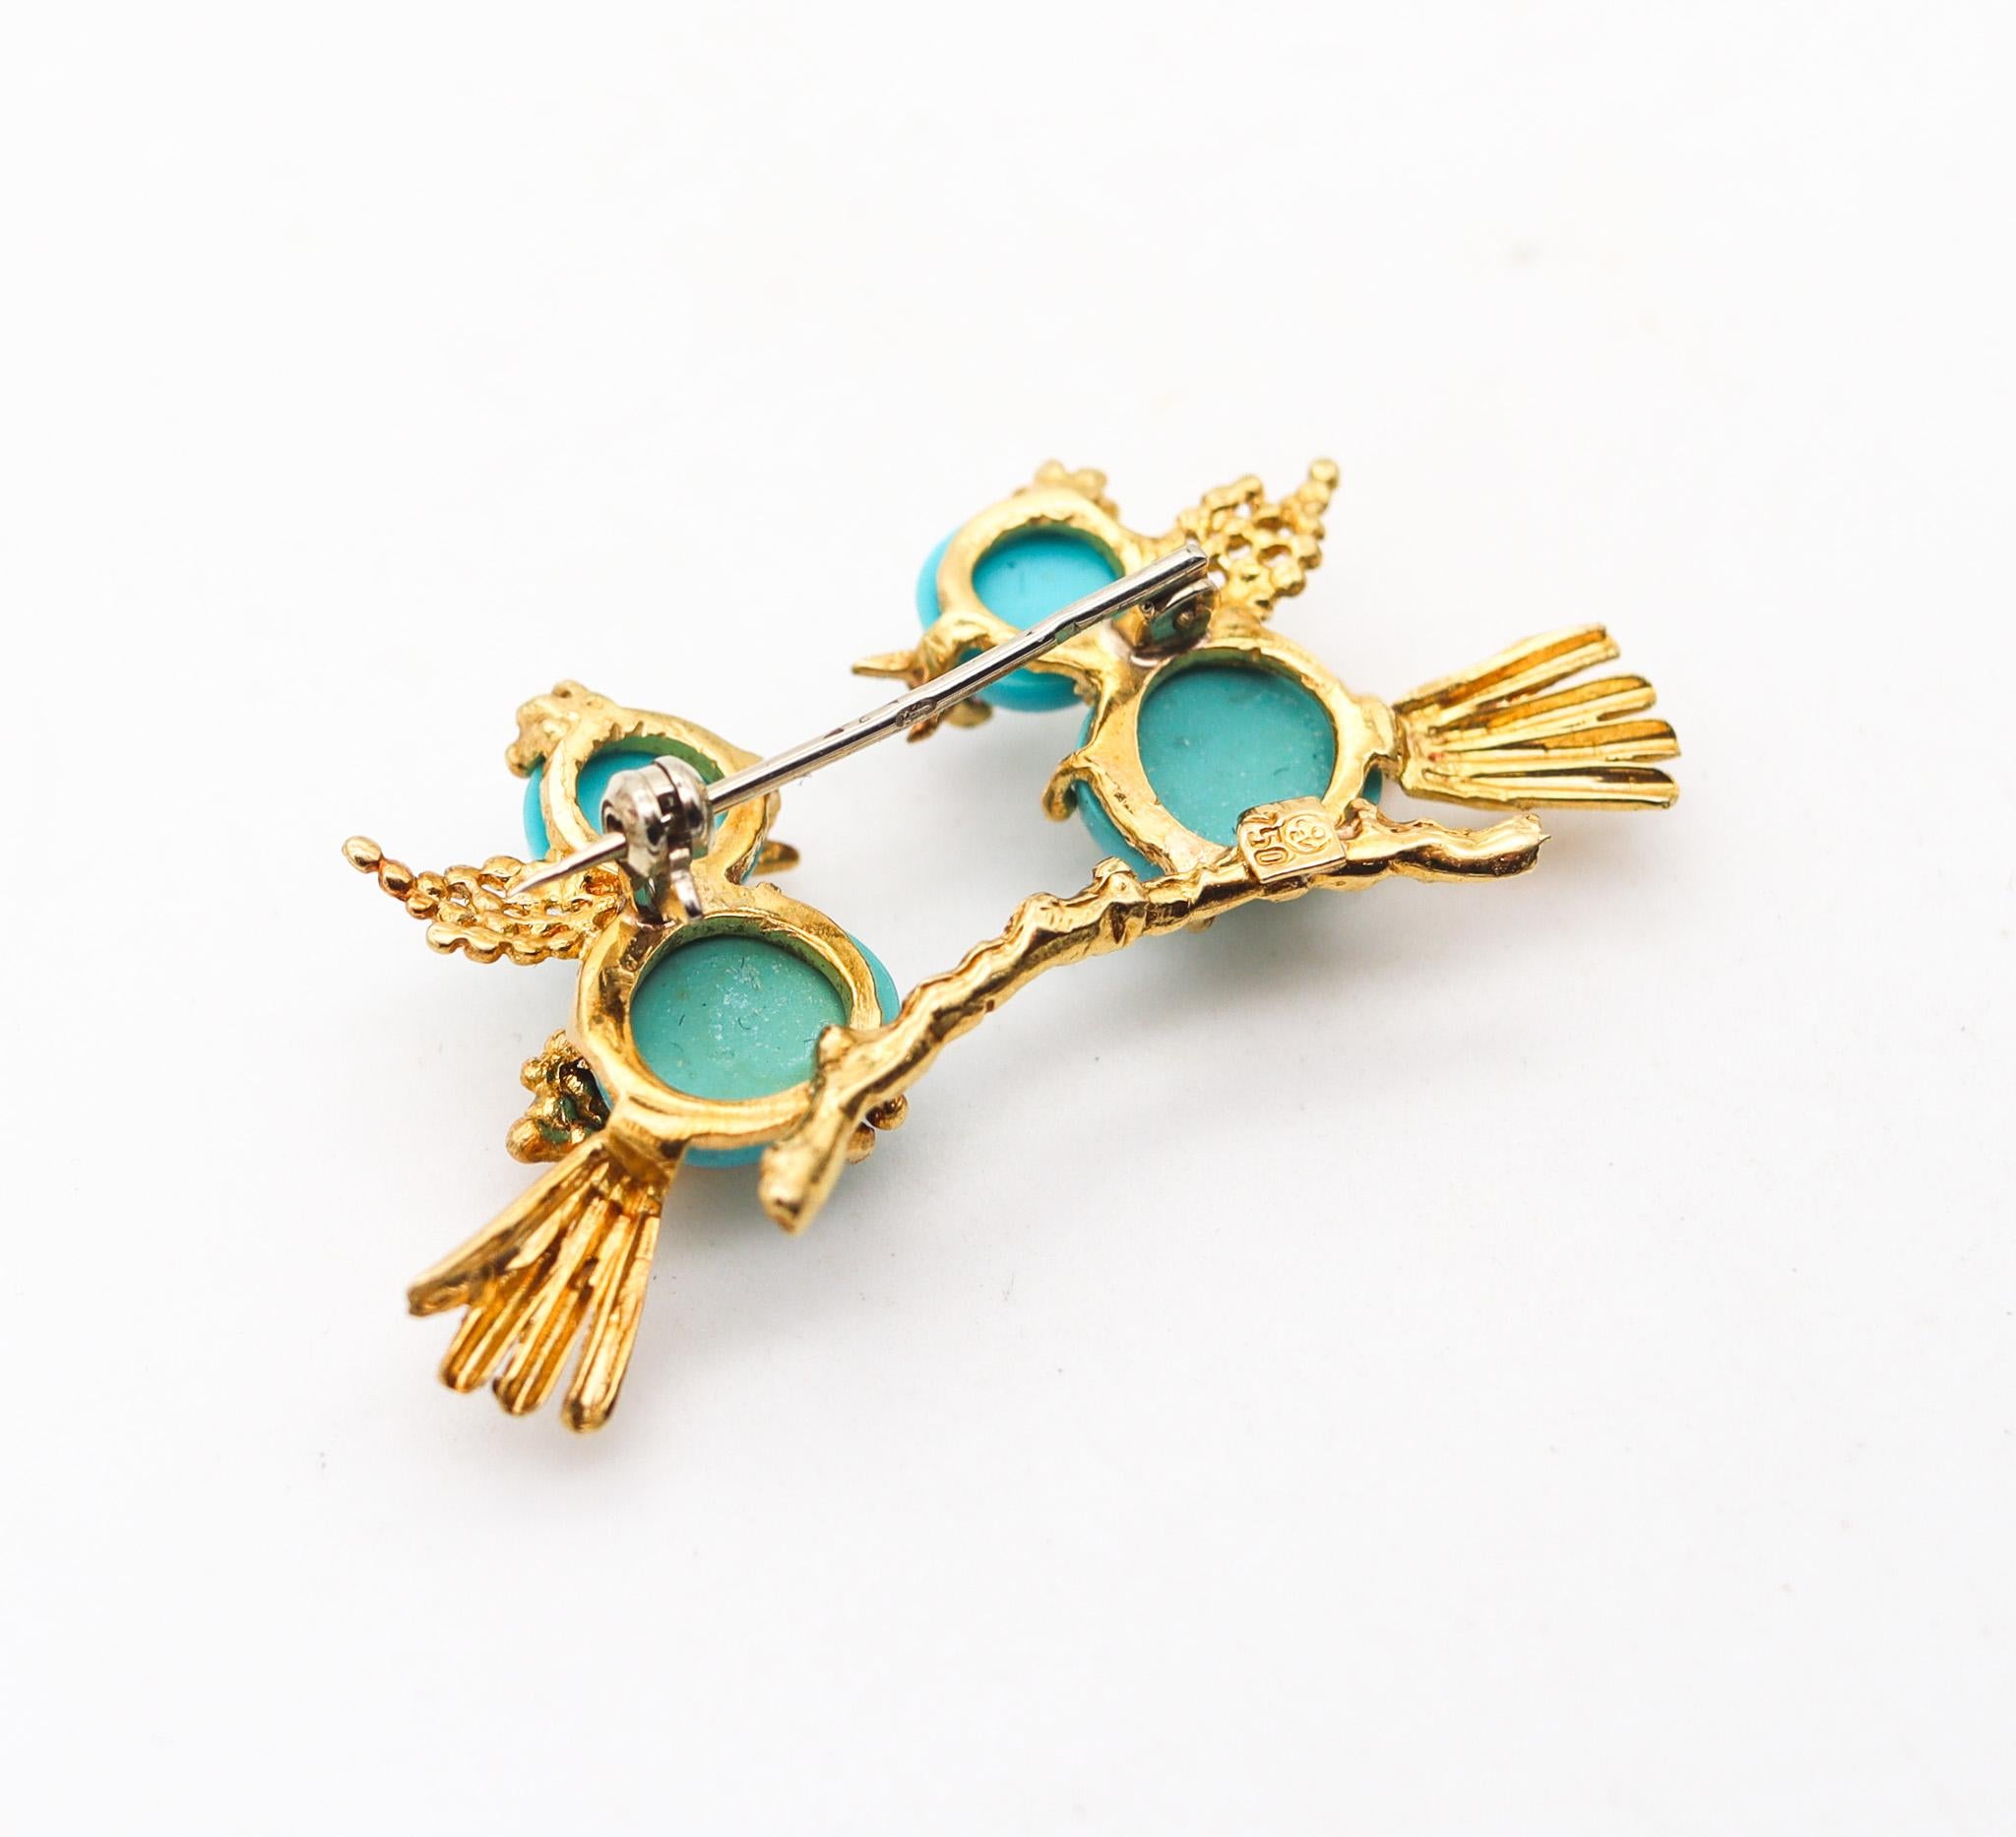 Cabochon Italian 1960 Love Birds Brooch In 18Kt Yellow Gold With Turquoises And Rubies